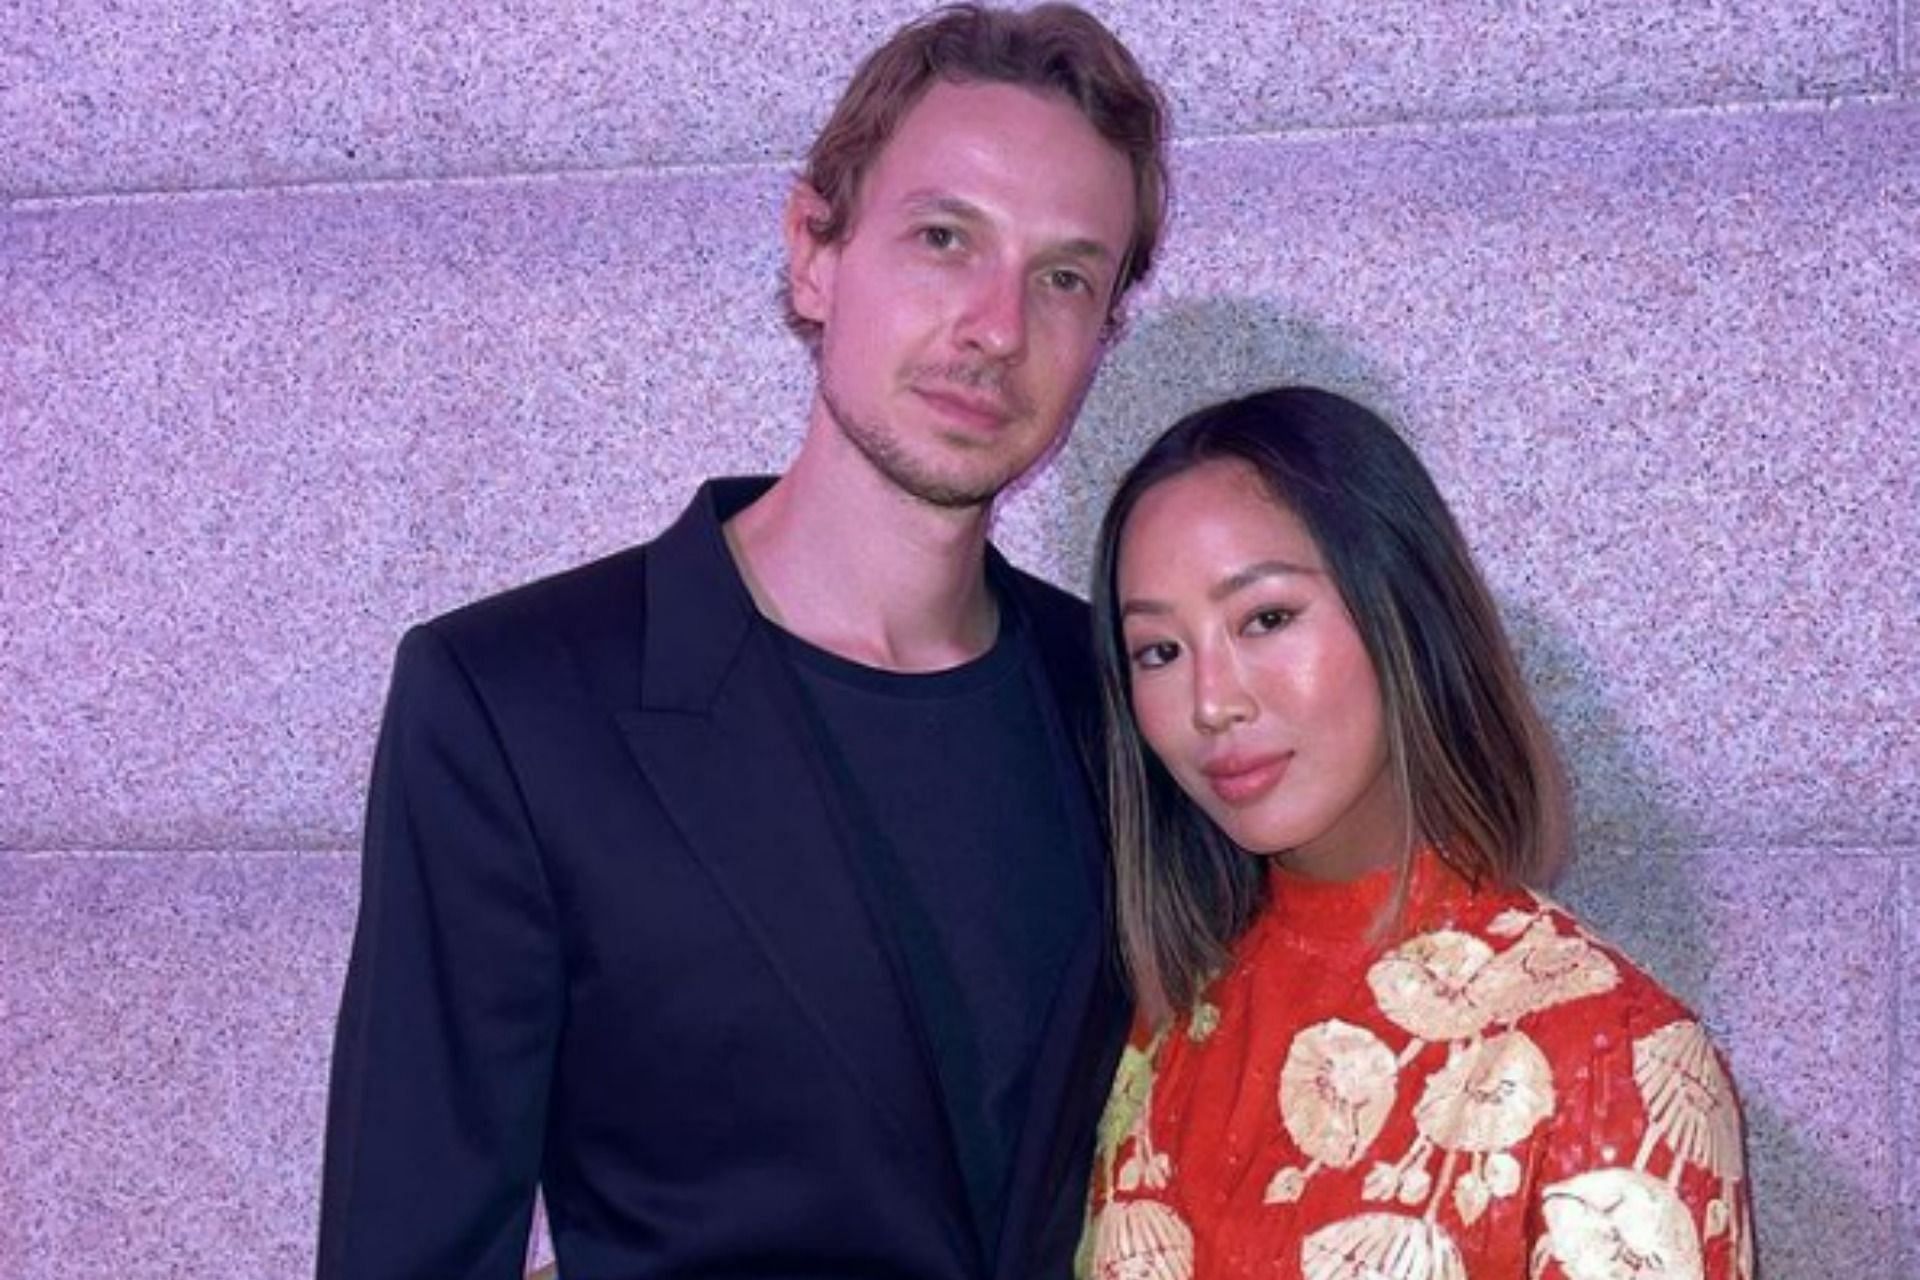 Aimee Song gives birth to first child with boyfriend Jacopo Moschin (Image via aimeesong/Instagram)